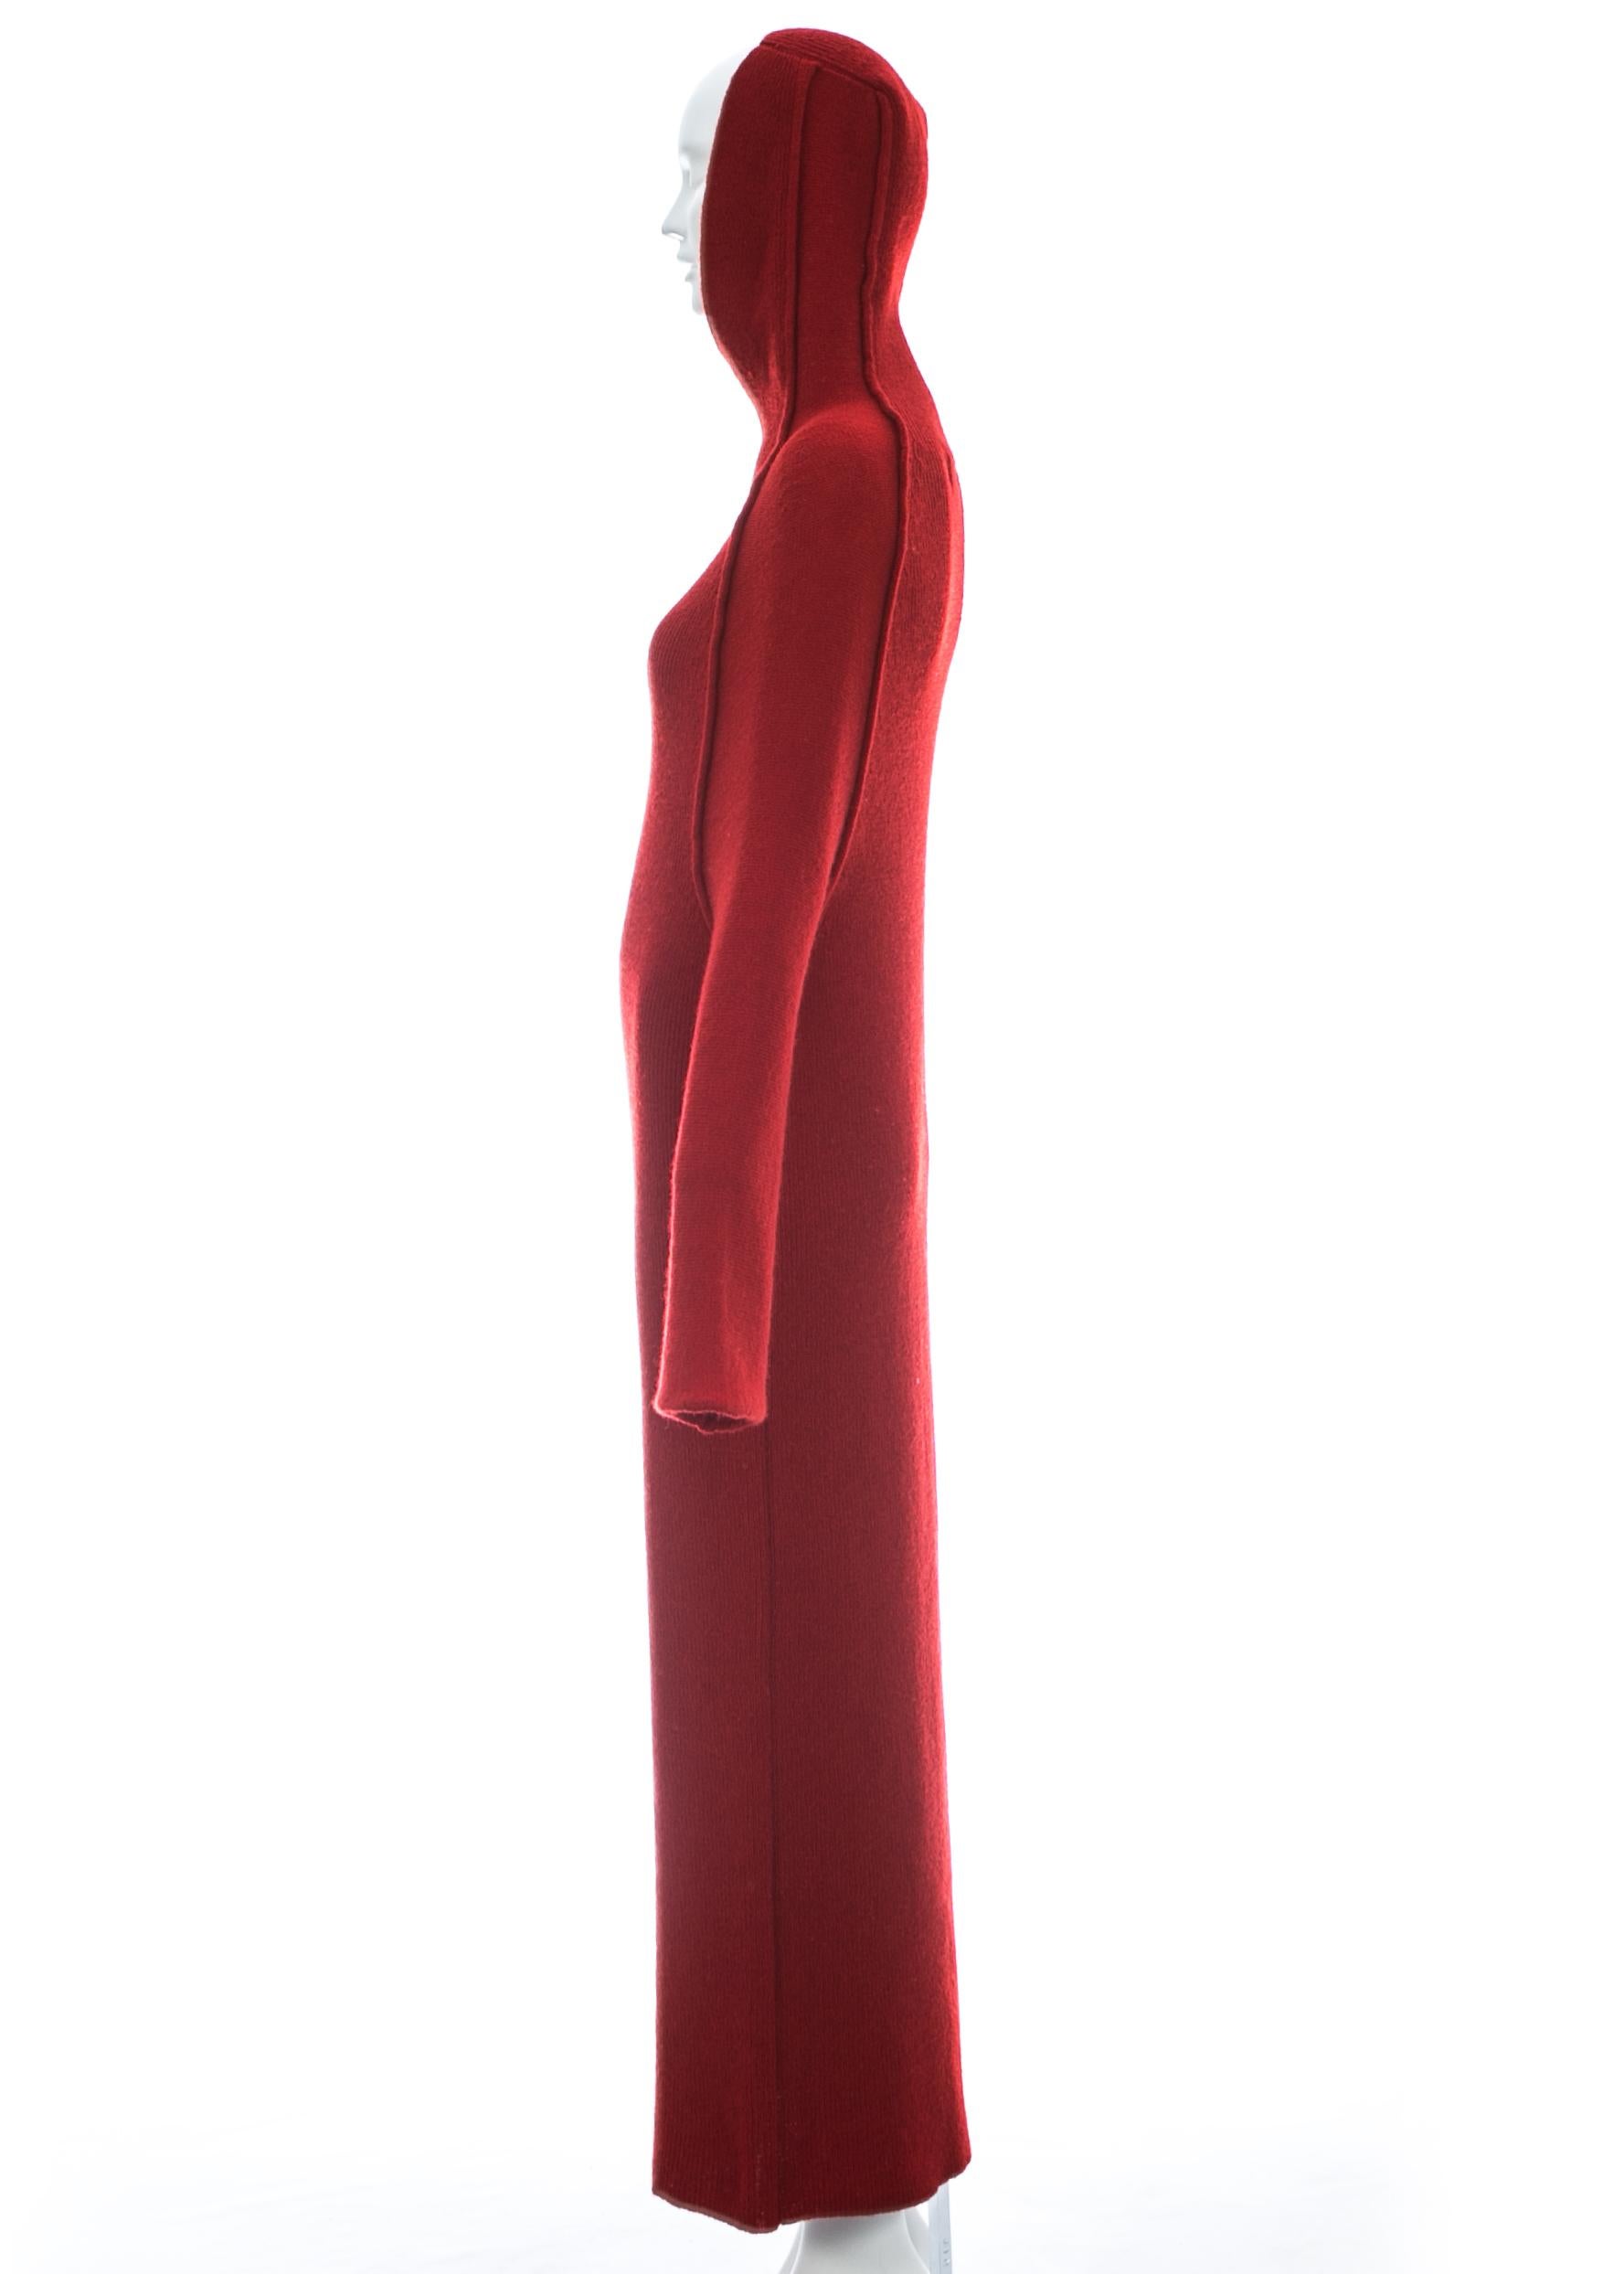 Yohji Yamamoto red wool hooded knitted maxi dress, c. 1990s For Sale 1